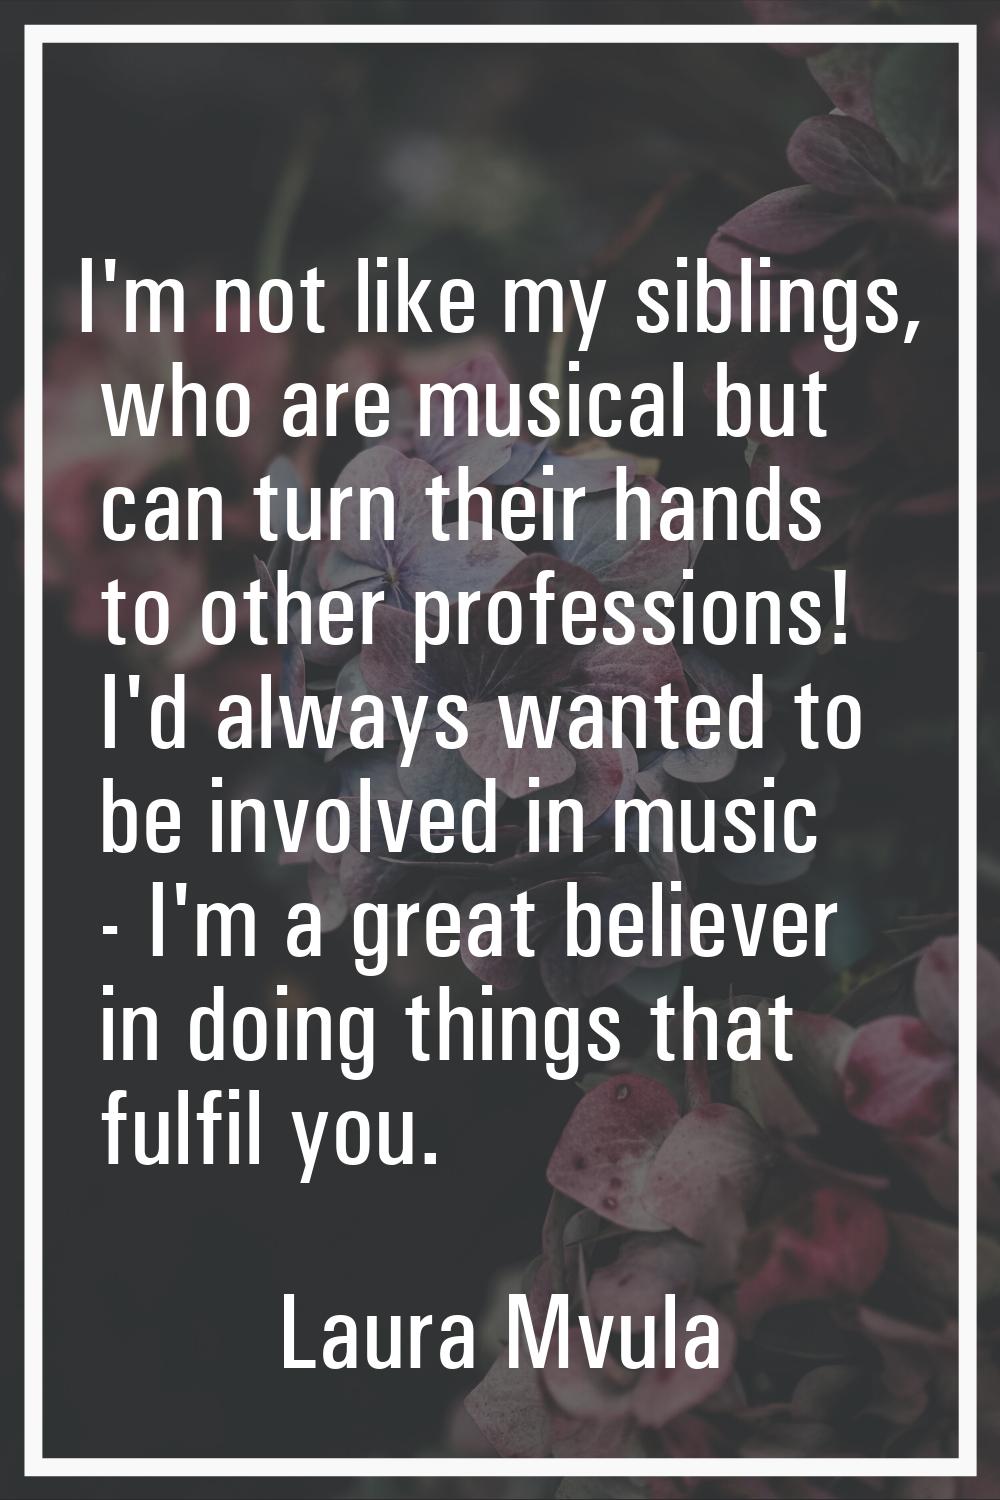 I'm not like my siblings, who are musical but can turn their hands to other professions! I'd always